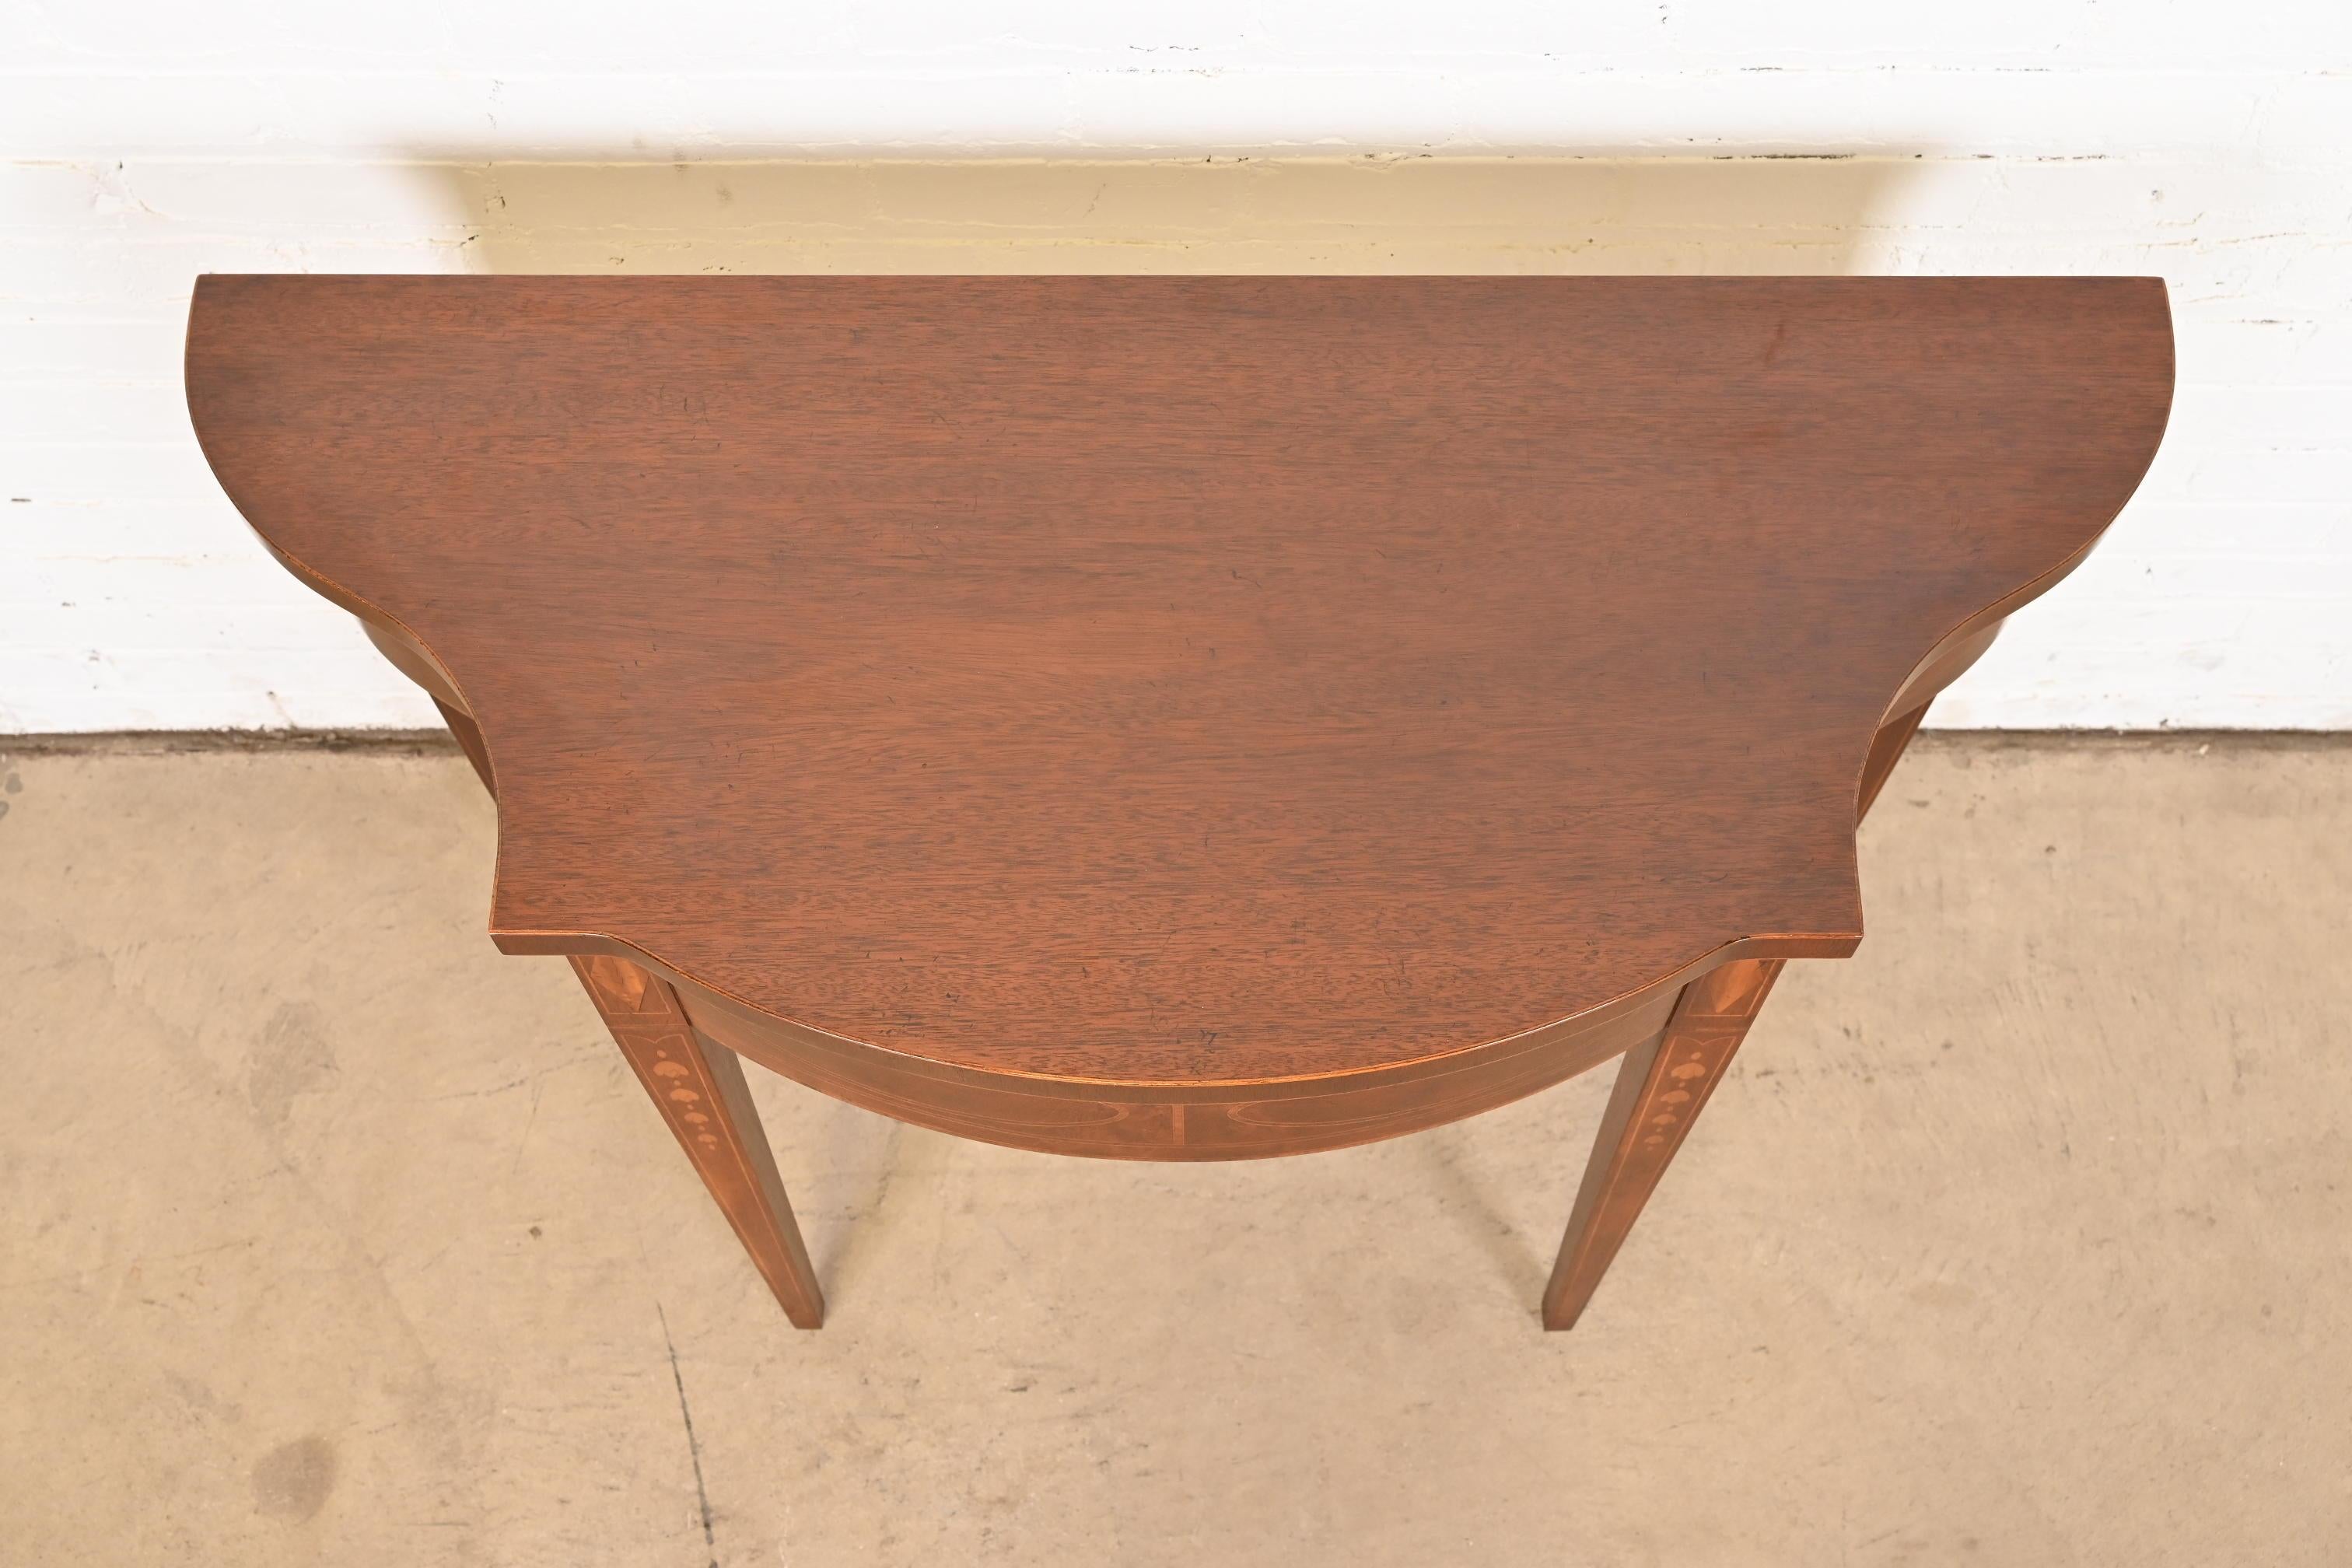 Baker Furniture Historic Charleston Federal Mahogany Console or Entry Table 3